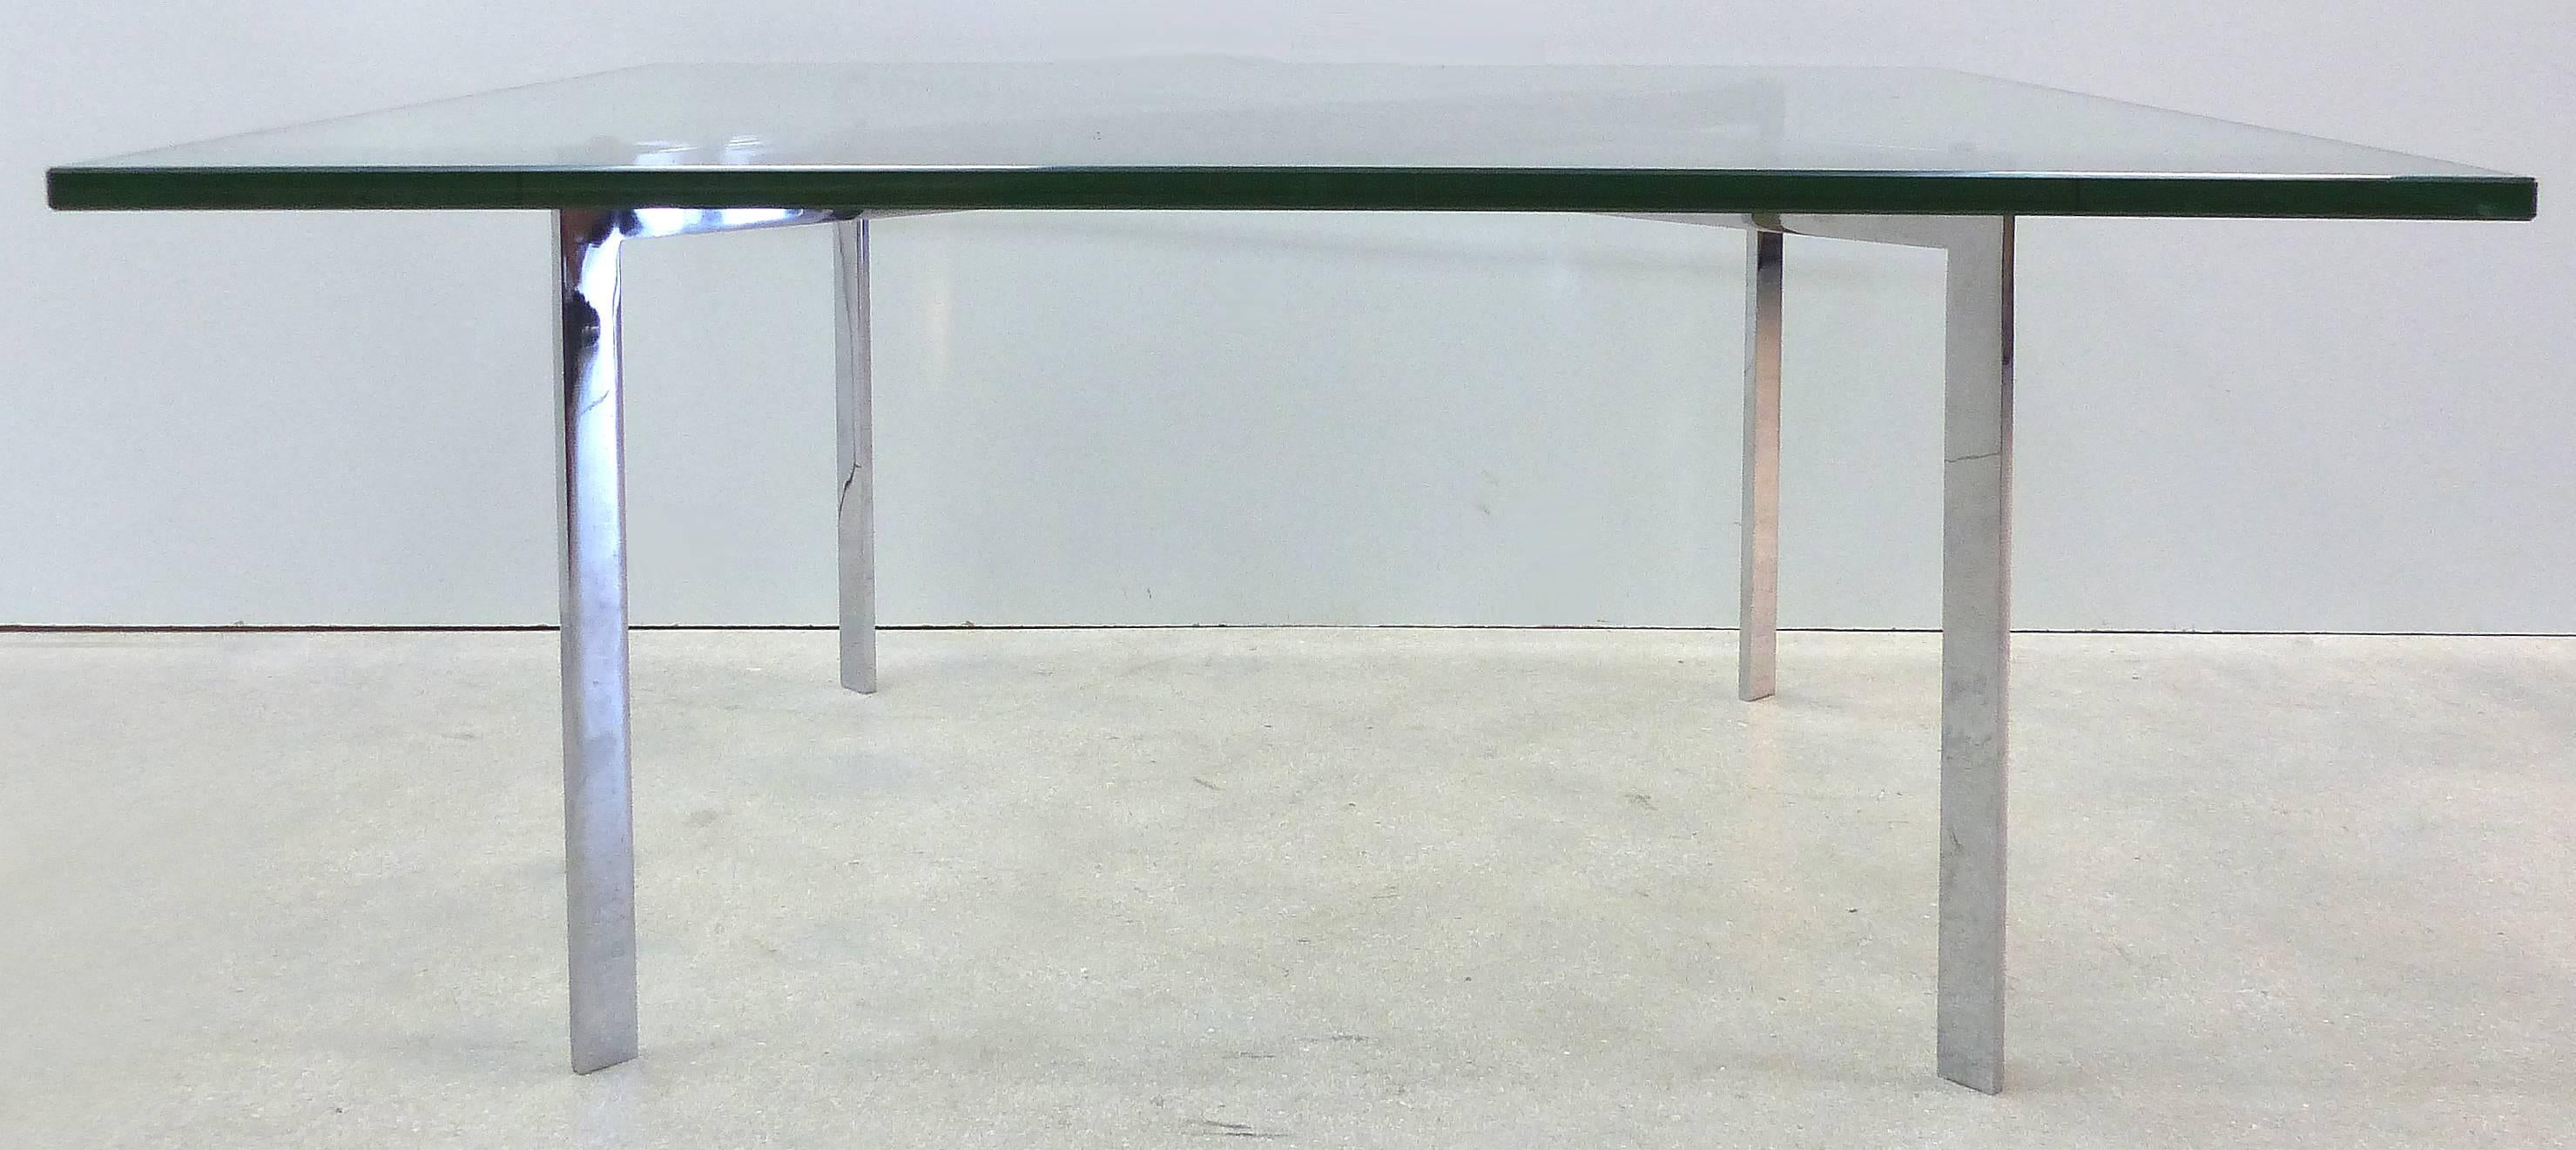 Mies Van Der Rohe Barcelona Coffee Table by Knoll

Offered for sale is an authentic Mies Van Der Rohe Barcelona coffee table of recent manufacture and produced by Knoll. The leg is signed as shown.